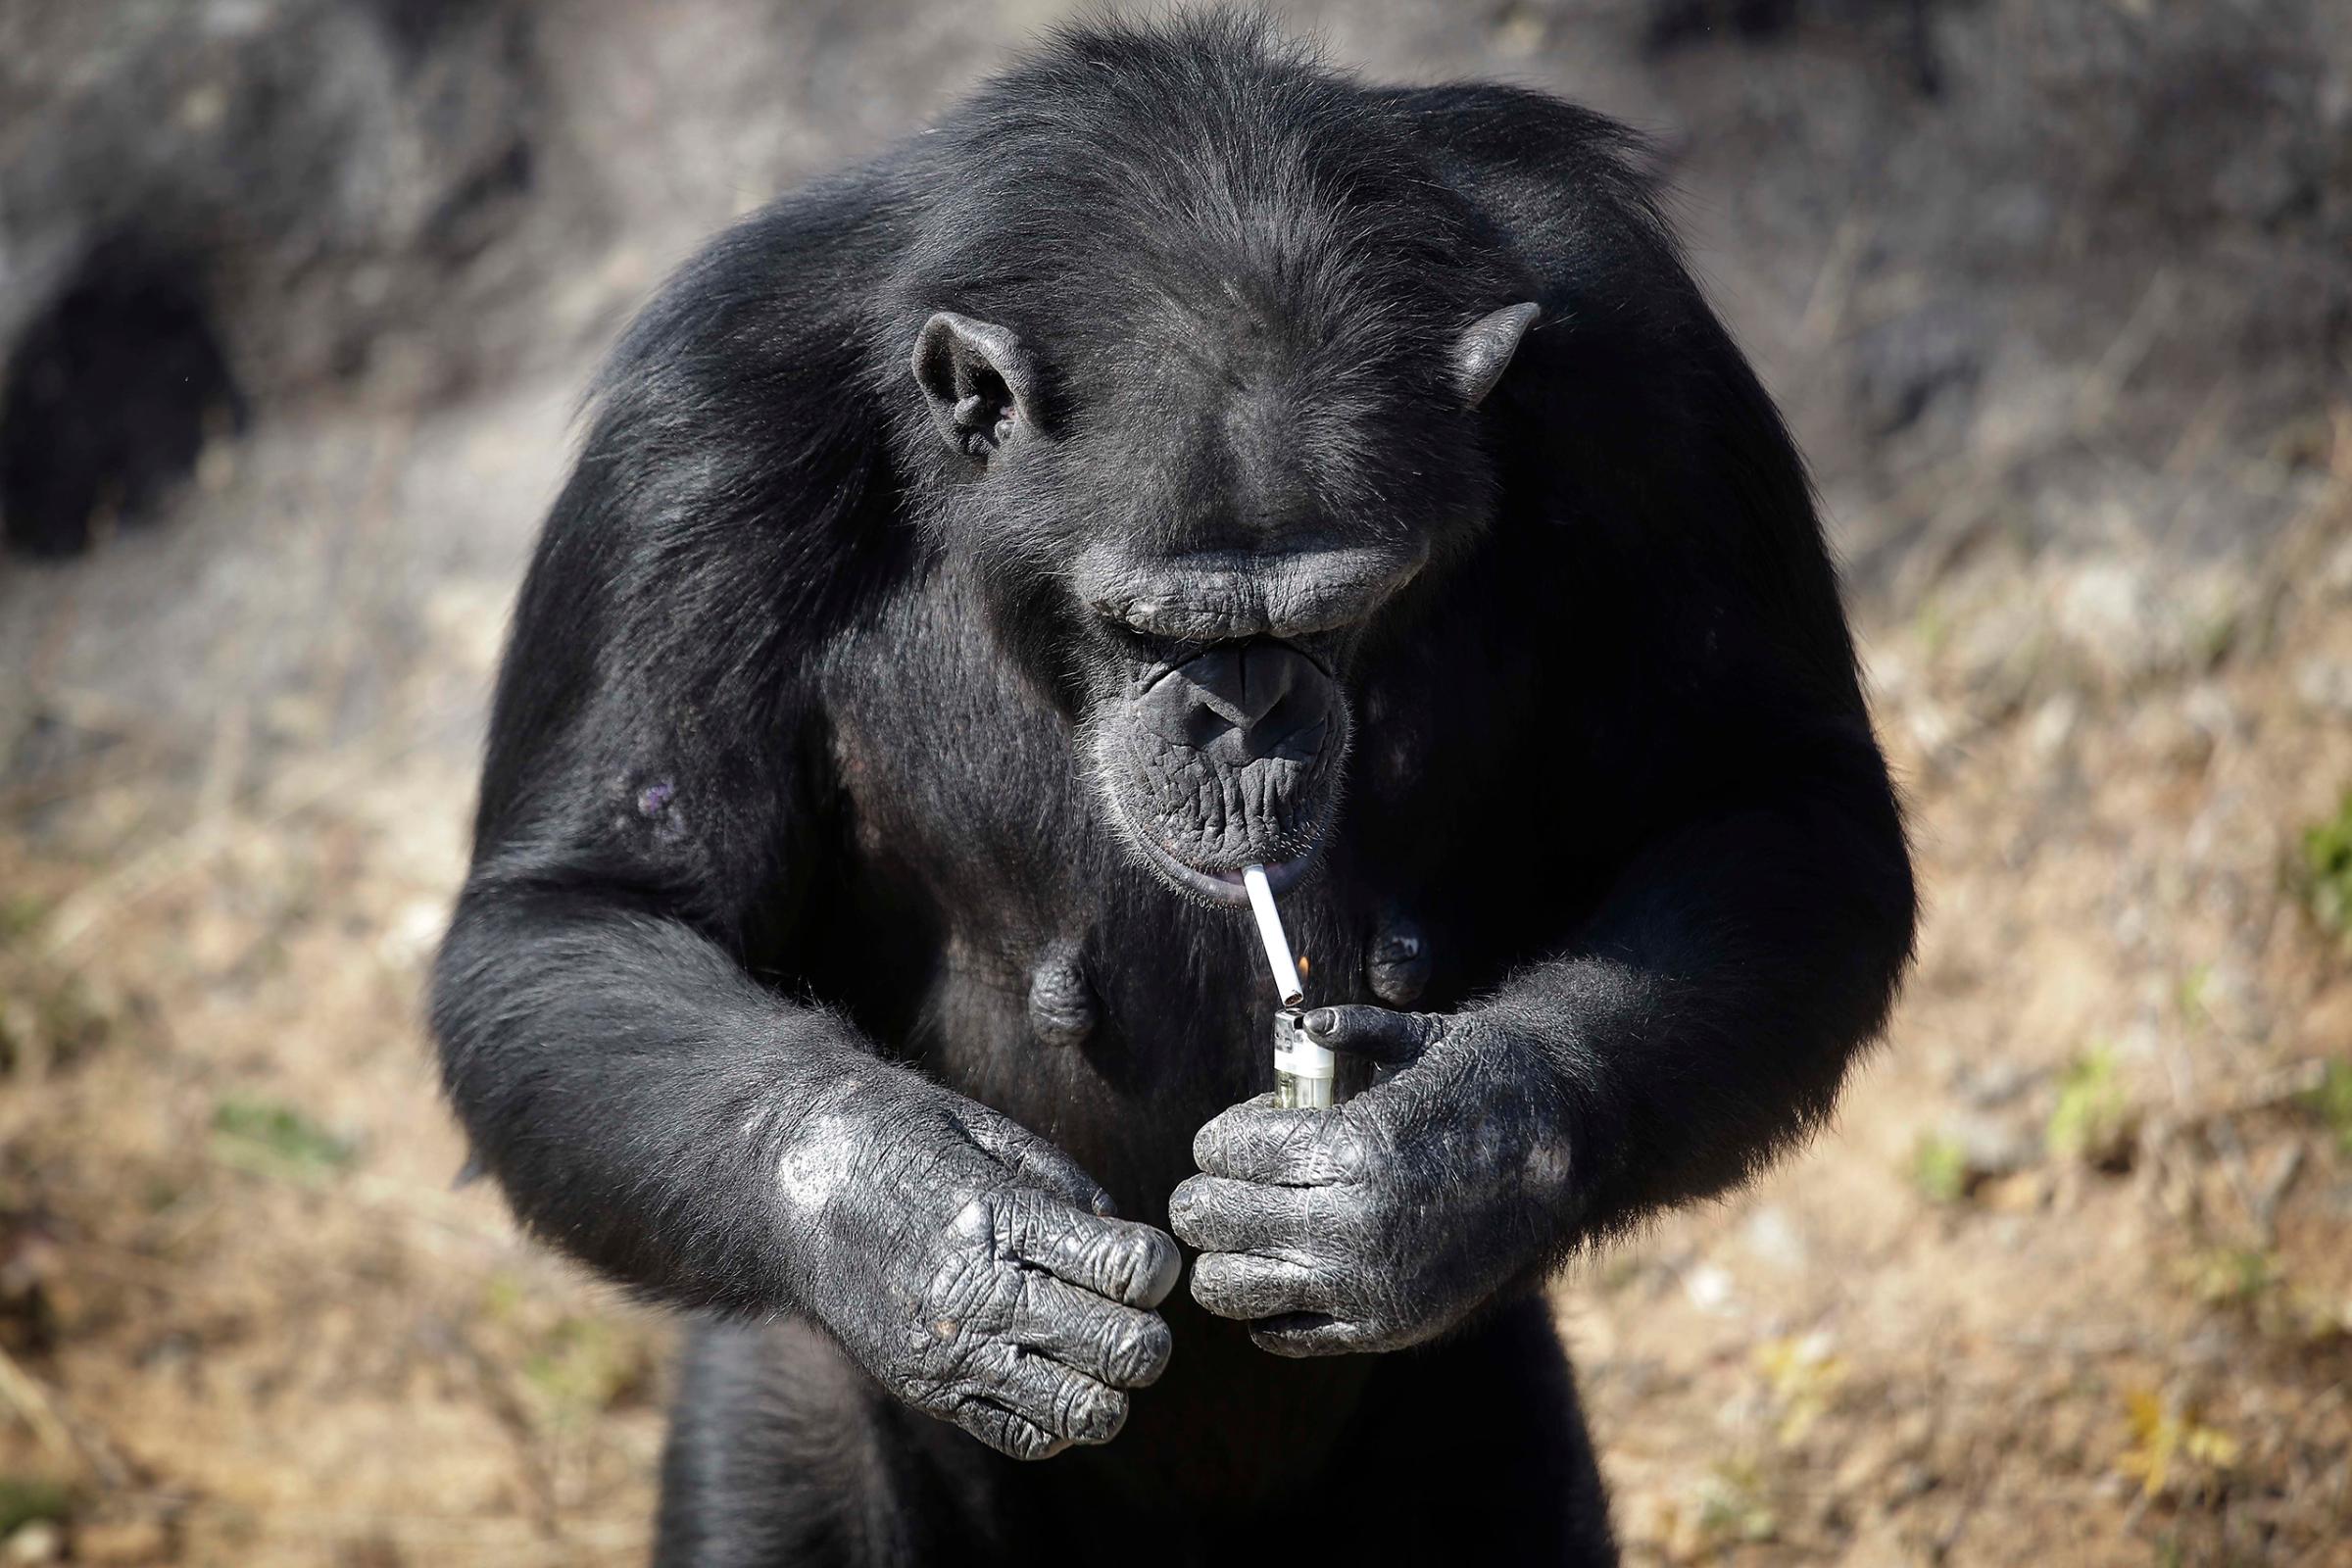 Azalea, a 19-year-old female chimpanzee whose Korean name is "Dallae," lights a cigarette in her enclosure at the Central Zoo in Pyongyang, North Korea, on Oct. 19, 2016.